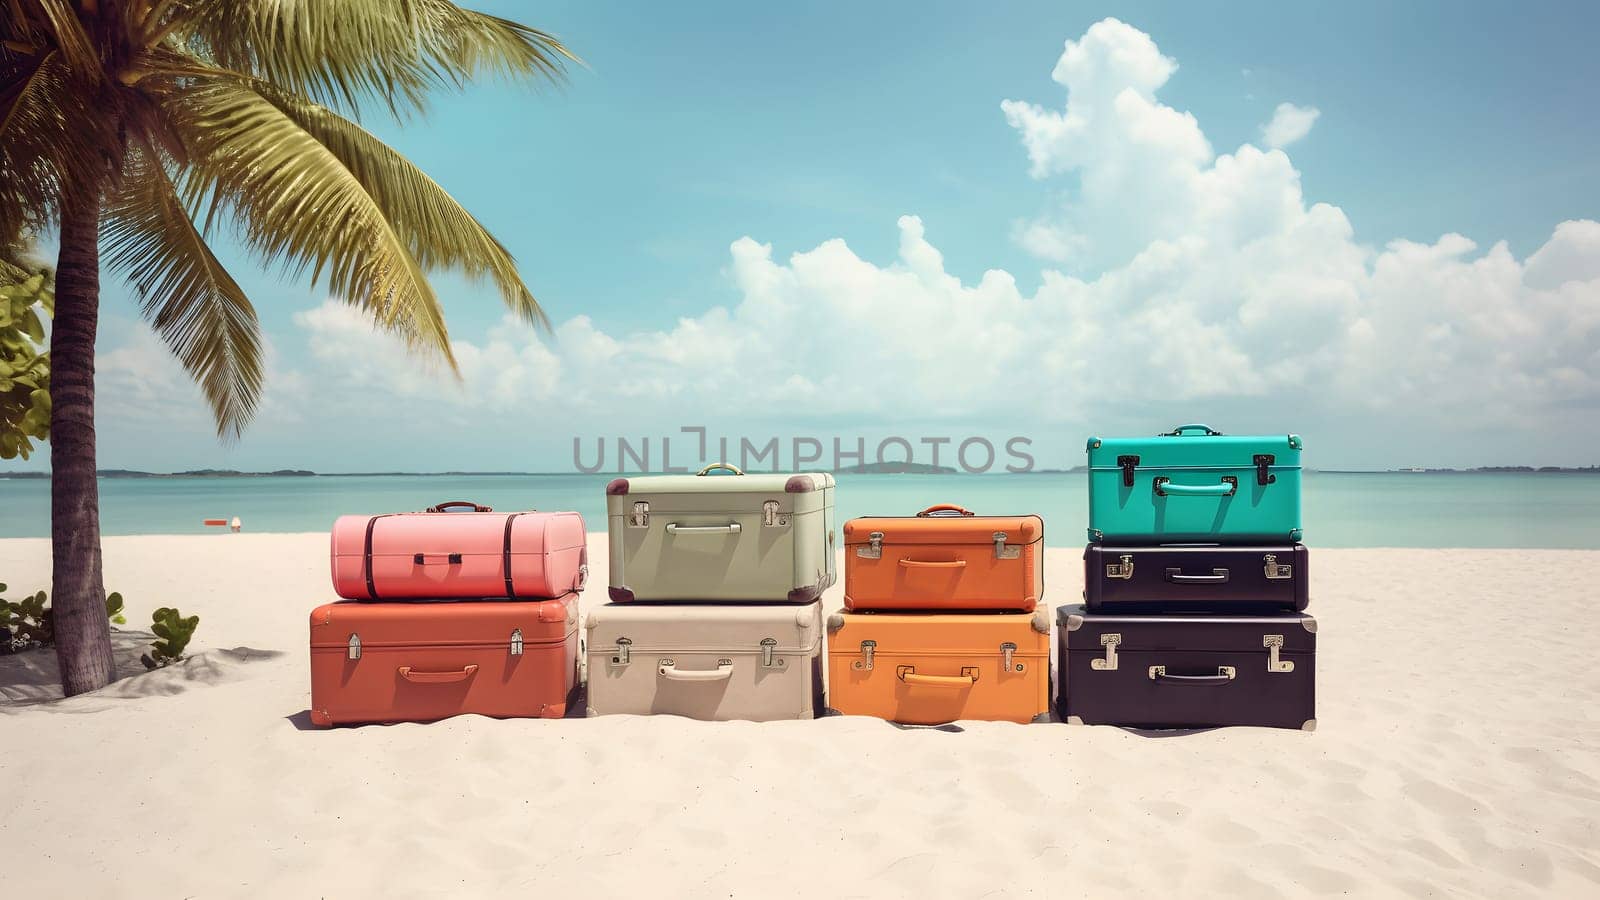 Few old-style leather or fiber suitcases laid on sand on sunny tropical beach. Neural network generated in May 2023. Not based on any actual person, scene or pattern.